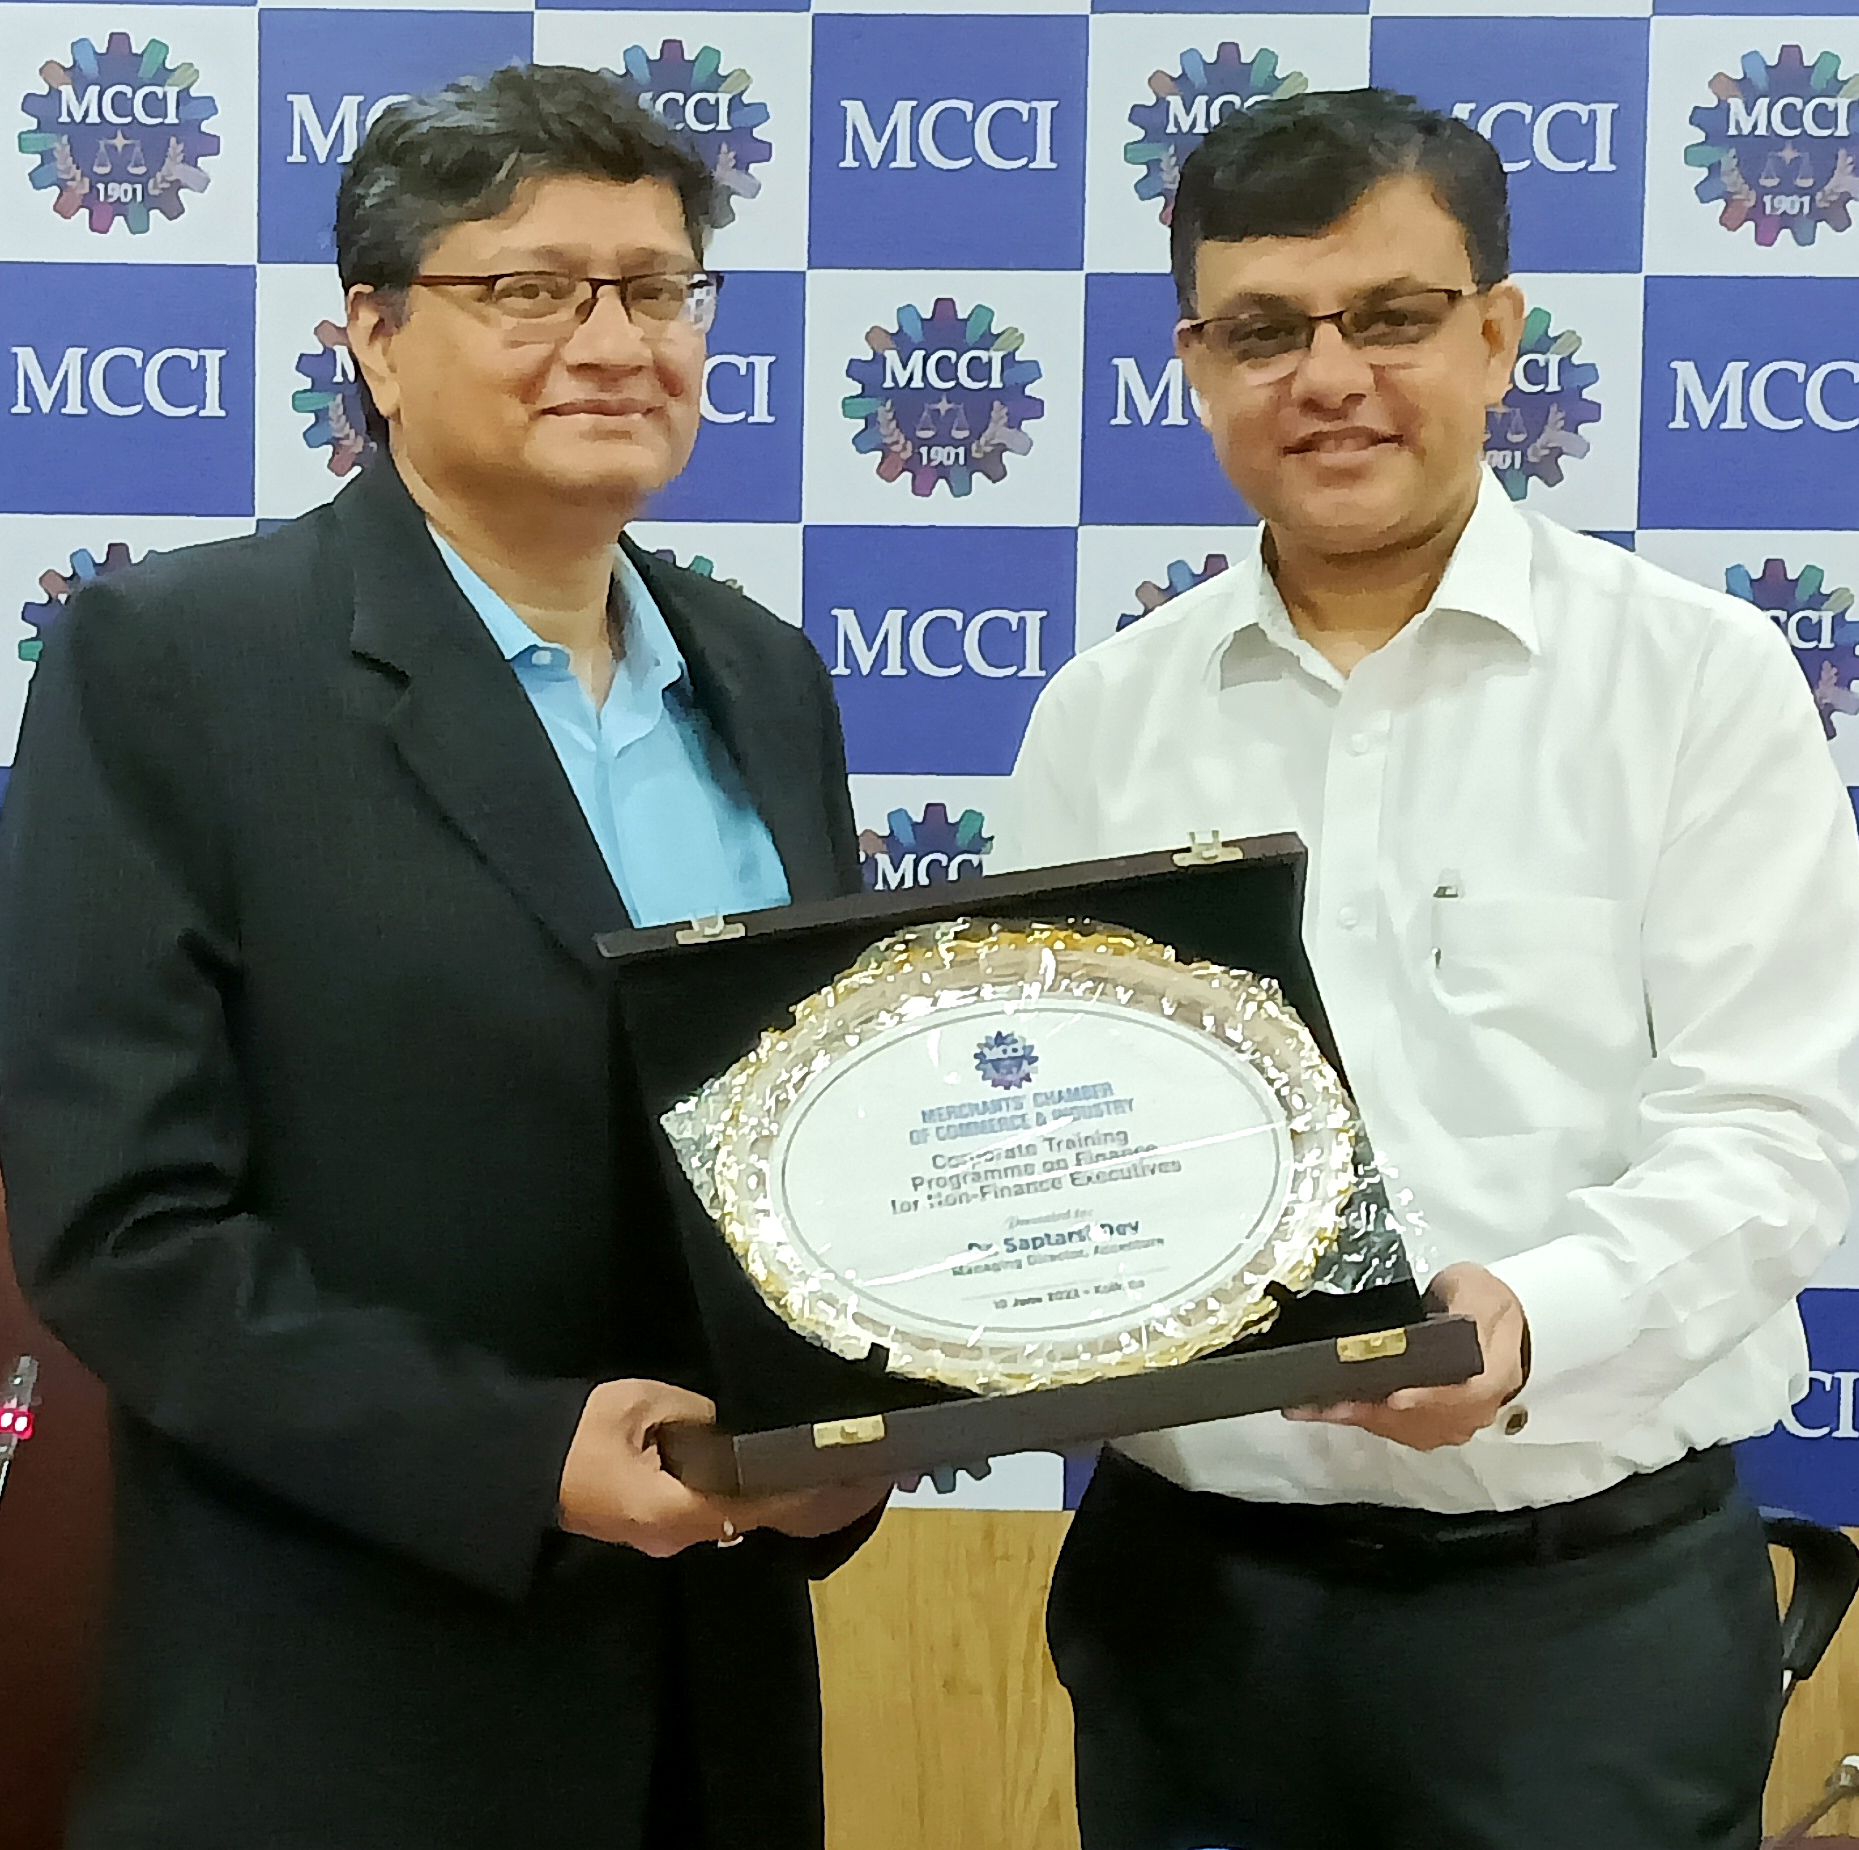 Shri Rishabh C. Kothari, President, MCCI presenting a memento to Dr. Saptarsi Dev, Managing Director, Accenture on the event of Corporate Training Programme on 'Finance for Non-Finance Executives' held today at MCCI.